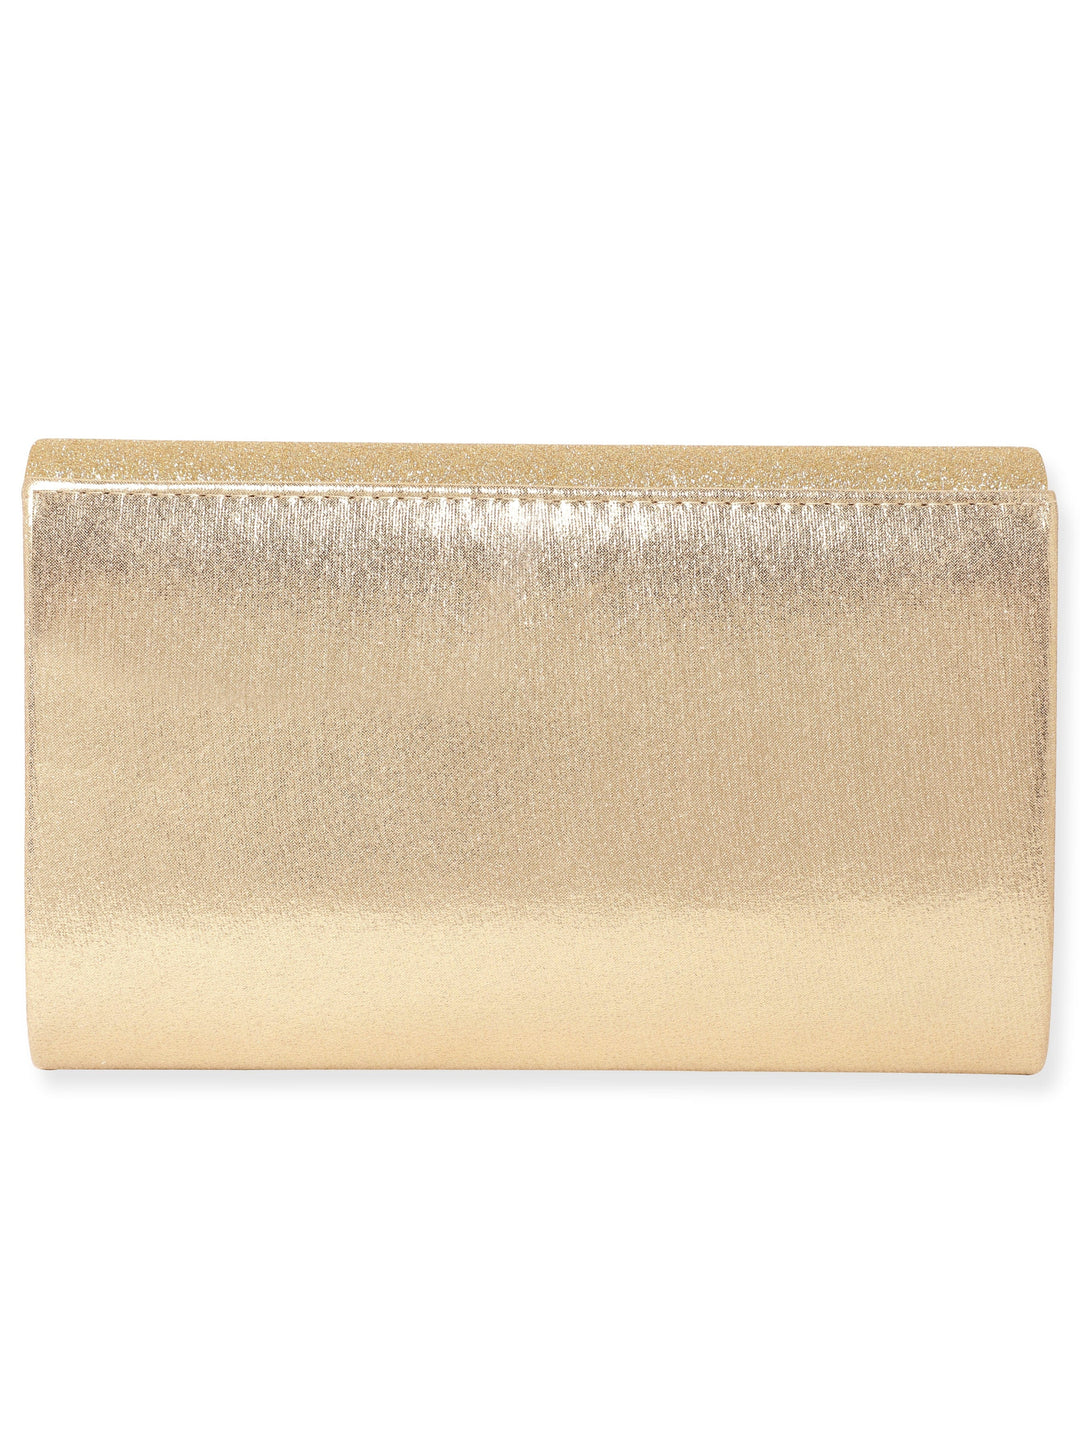 Rubans Starlit Opulence Handcrafted Shimmery Clutch Bag Handbag, Wallet Accessories & Clutches